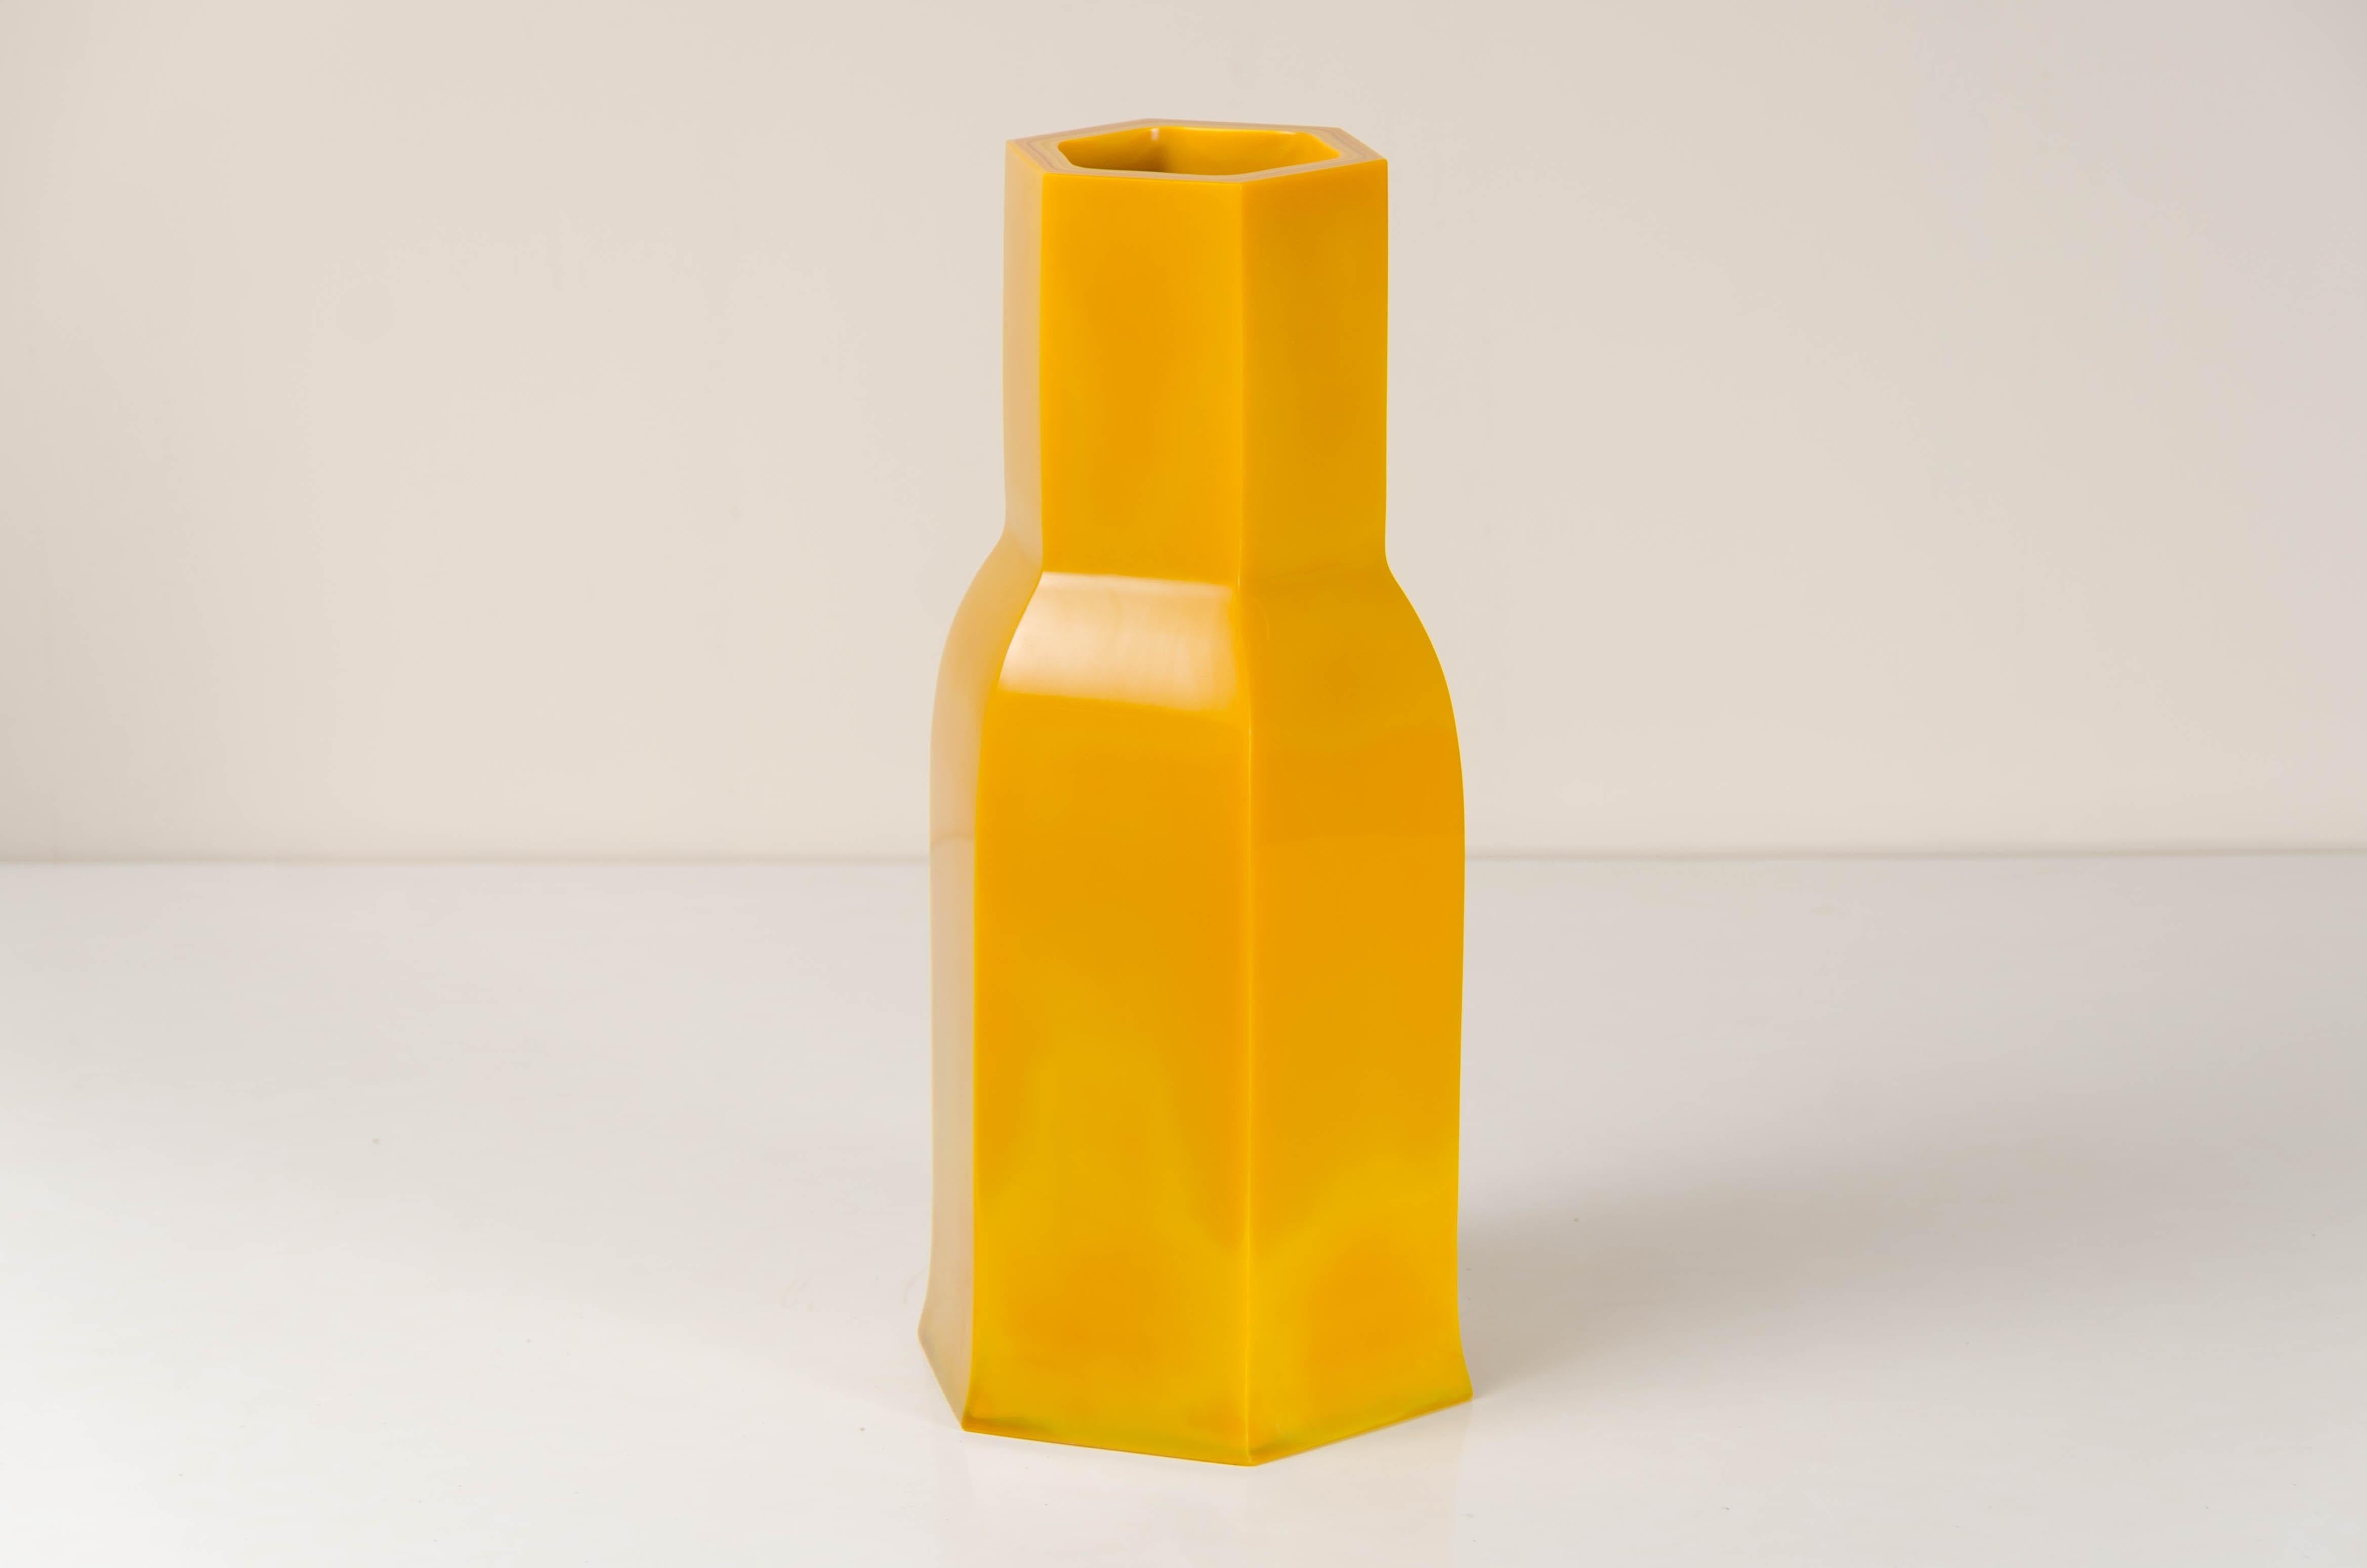 Hoof vase
Yellow peking glass
Hand blown glass
Hand carved
Limited edition

Peking glass refers to the high-quality glass art produced by the imperial and commercial workshops in Beijing during the Ching Dynasty, China 1644-1911. Since then,